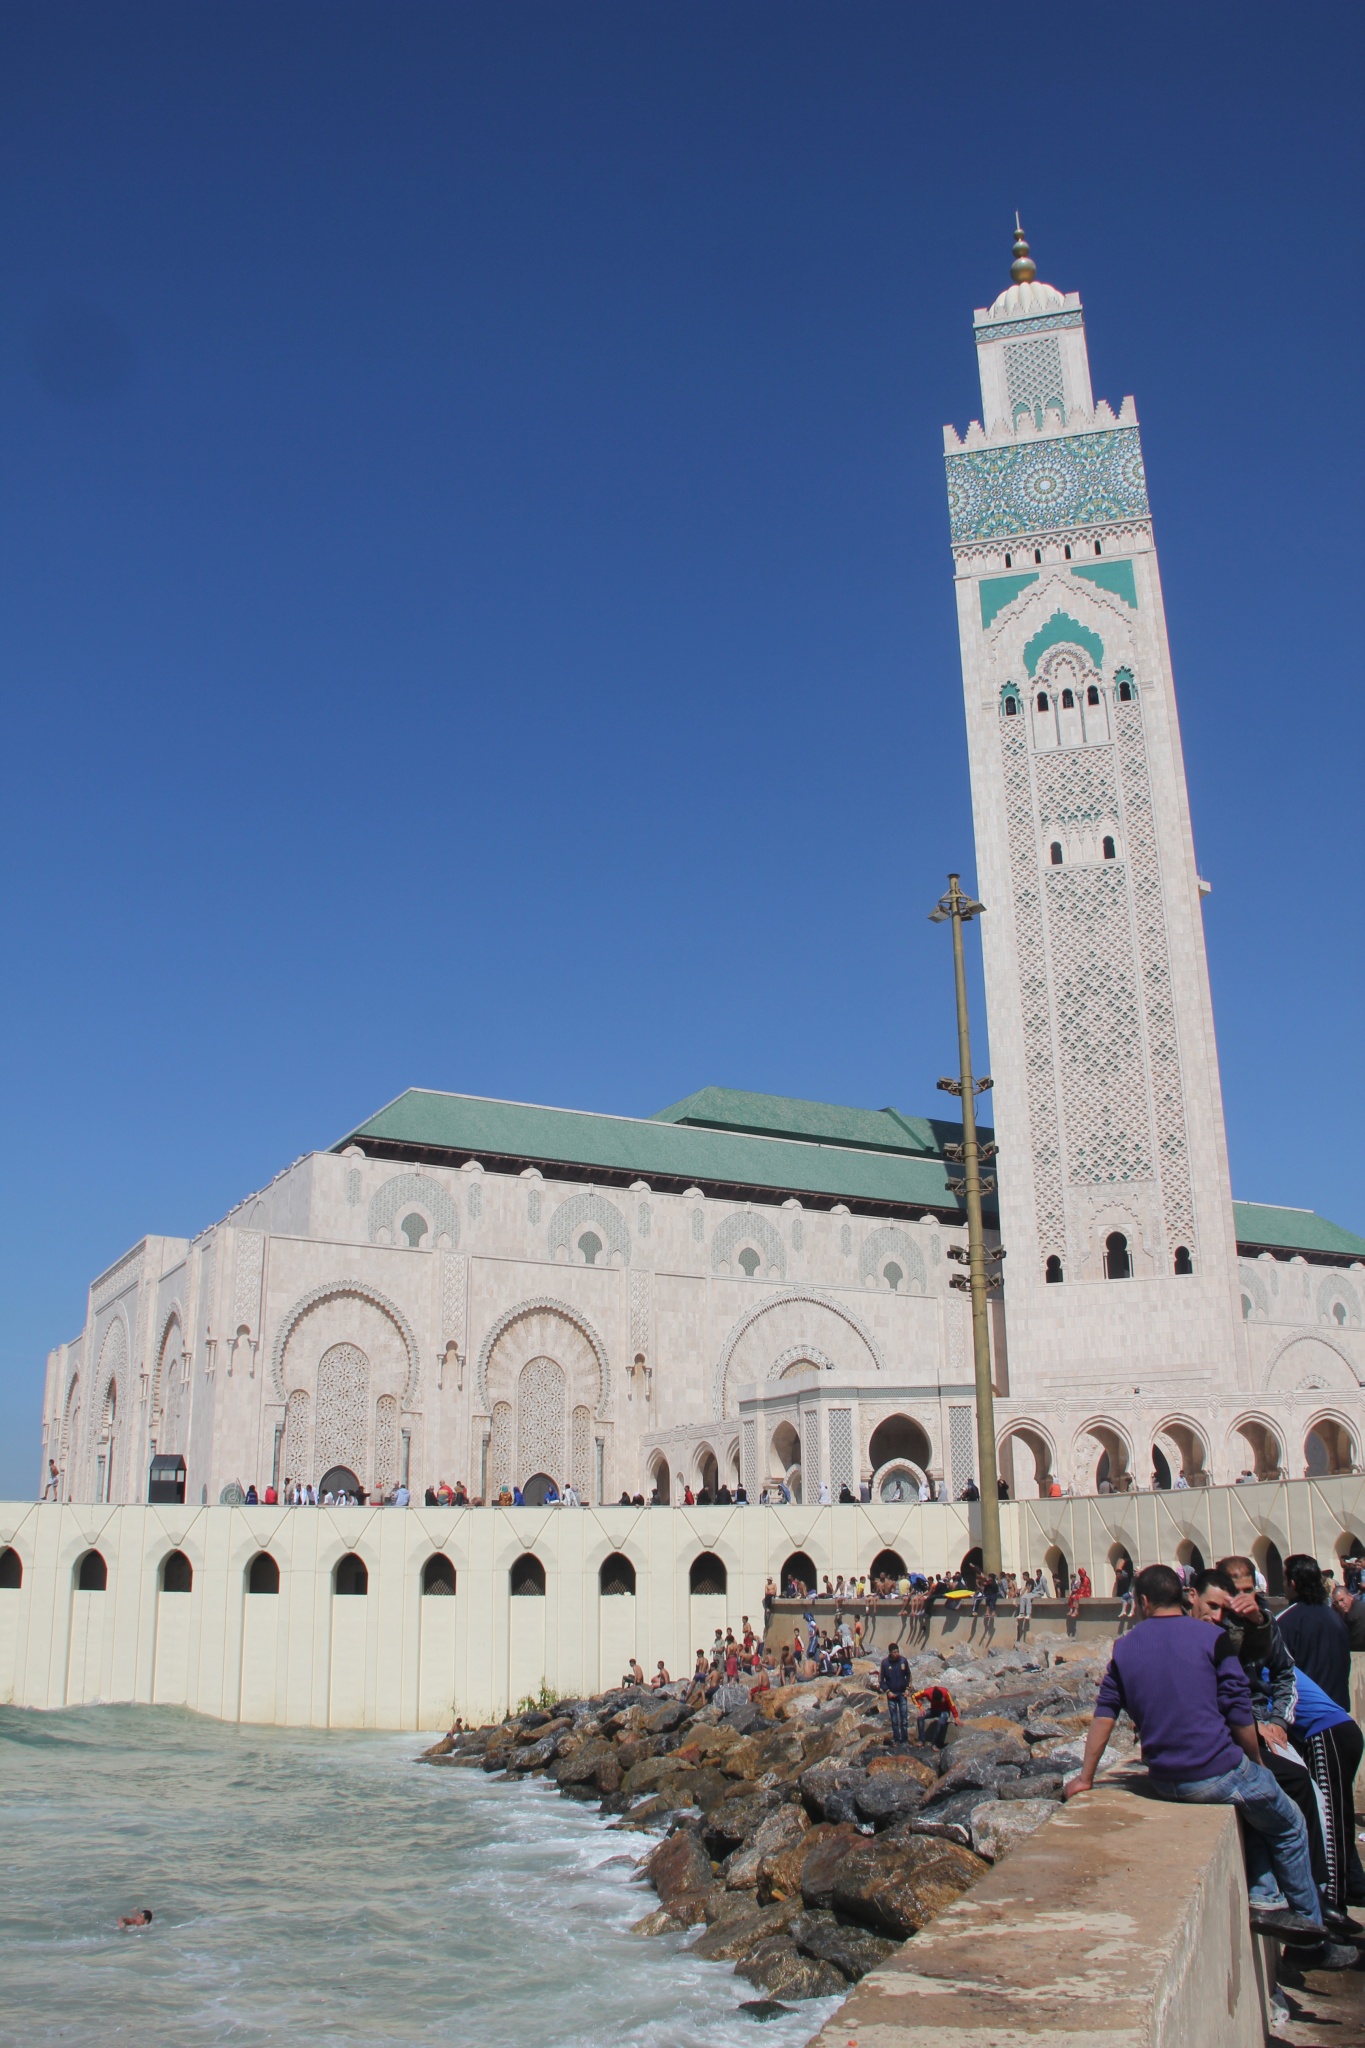 King Hassan II Mosque exterior with people on coast